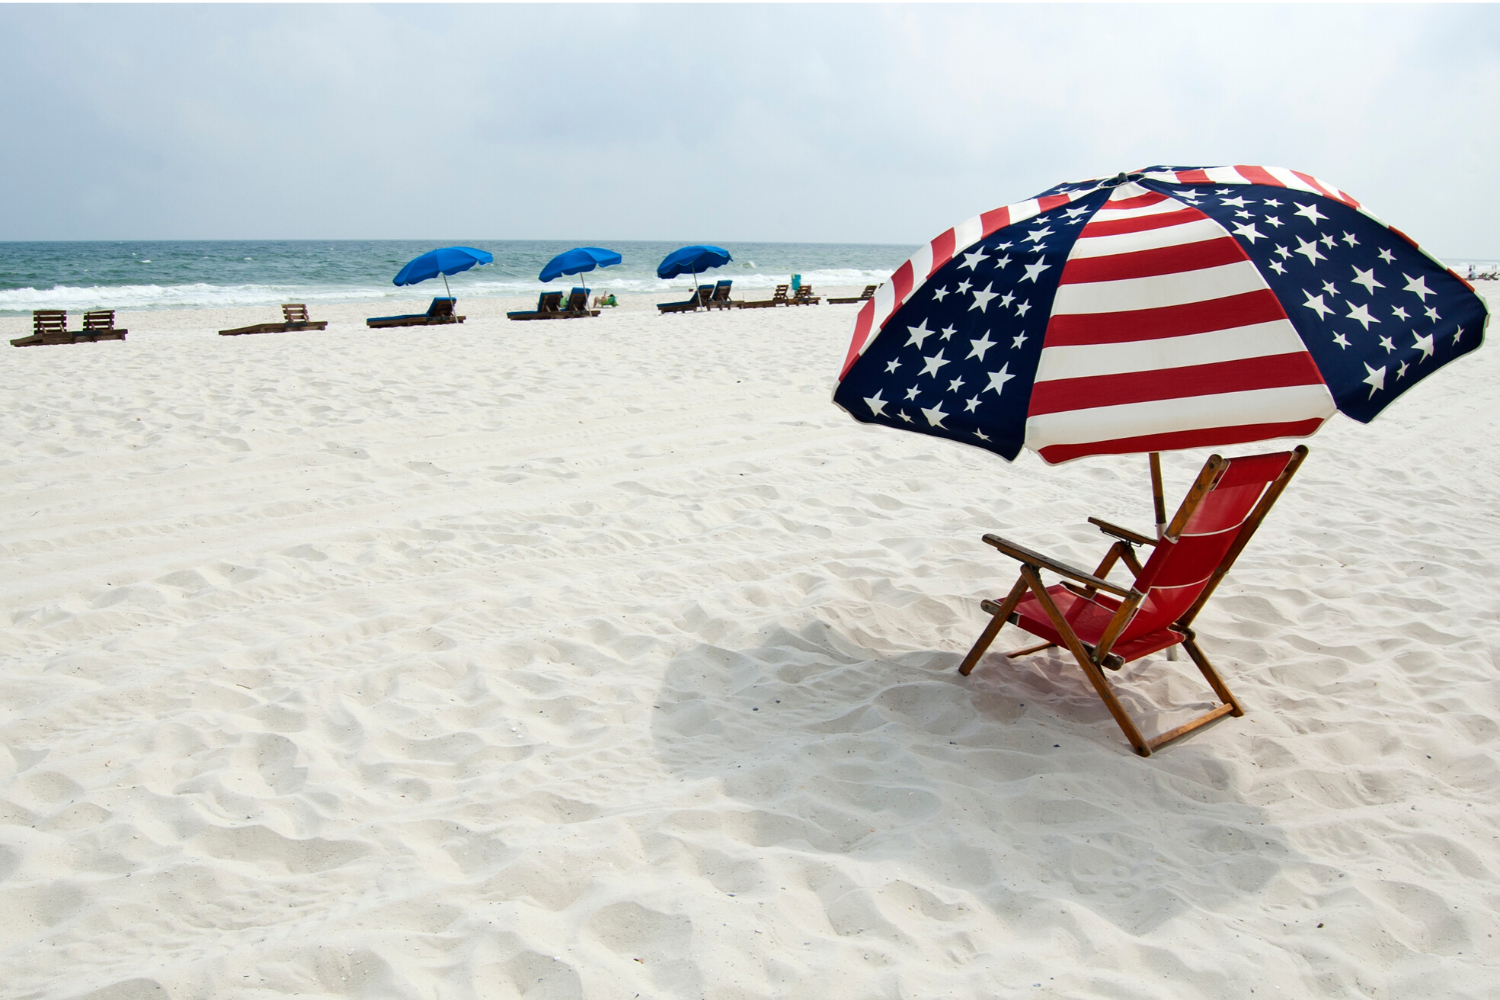  Beach Chair Rentals Gulfport Ms for Small Space